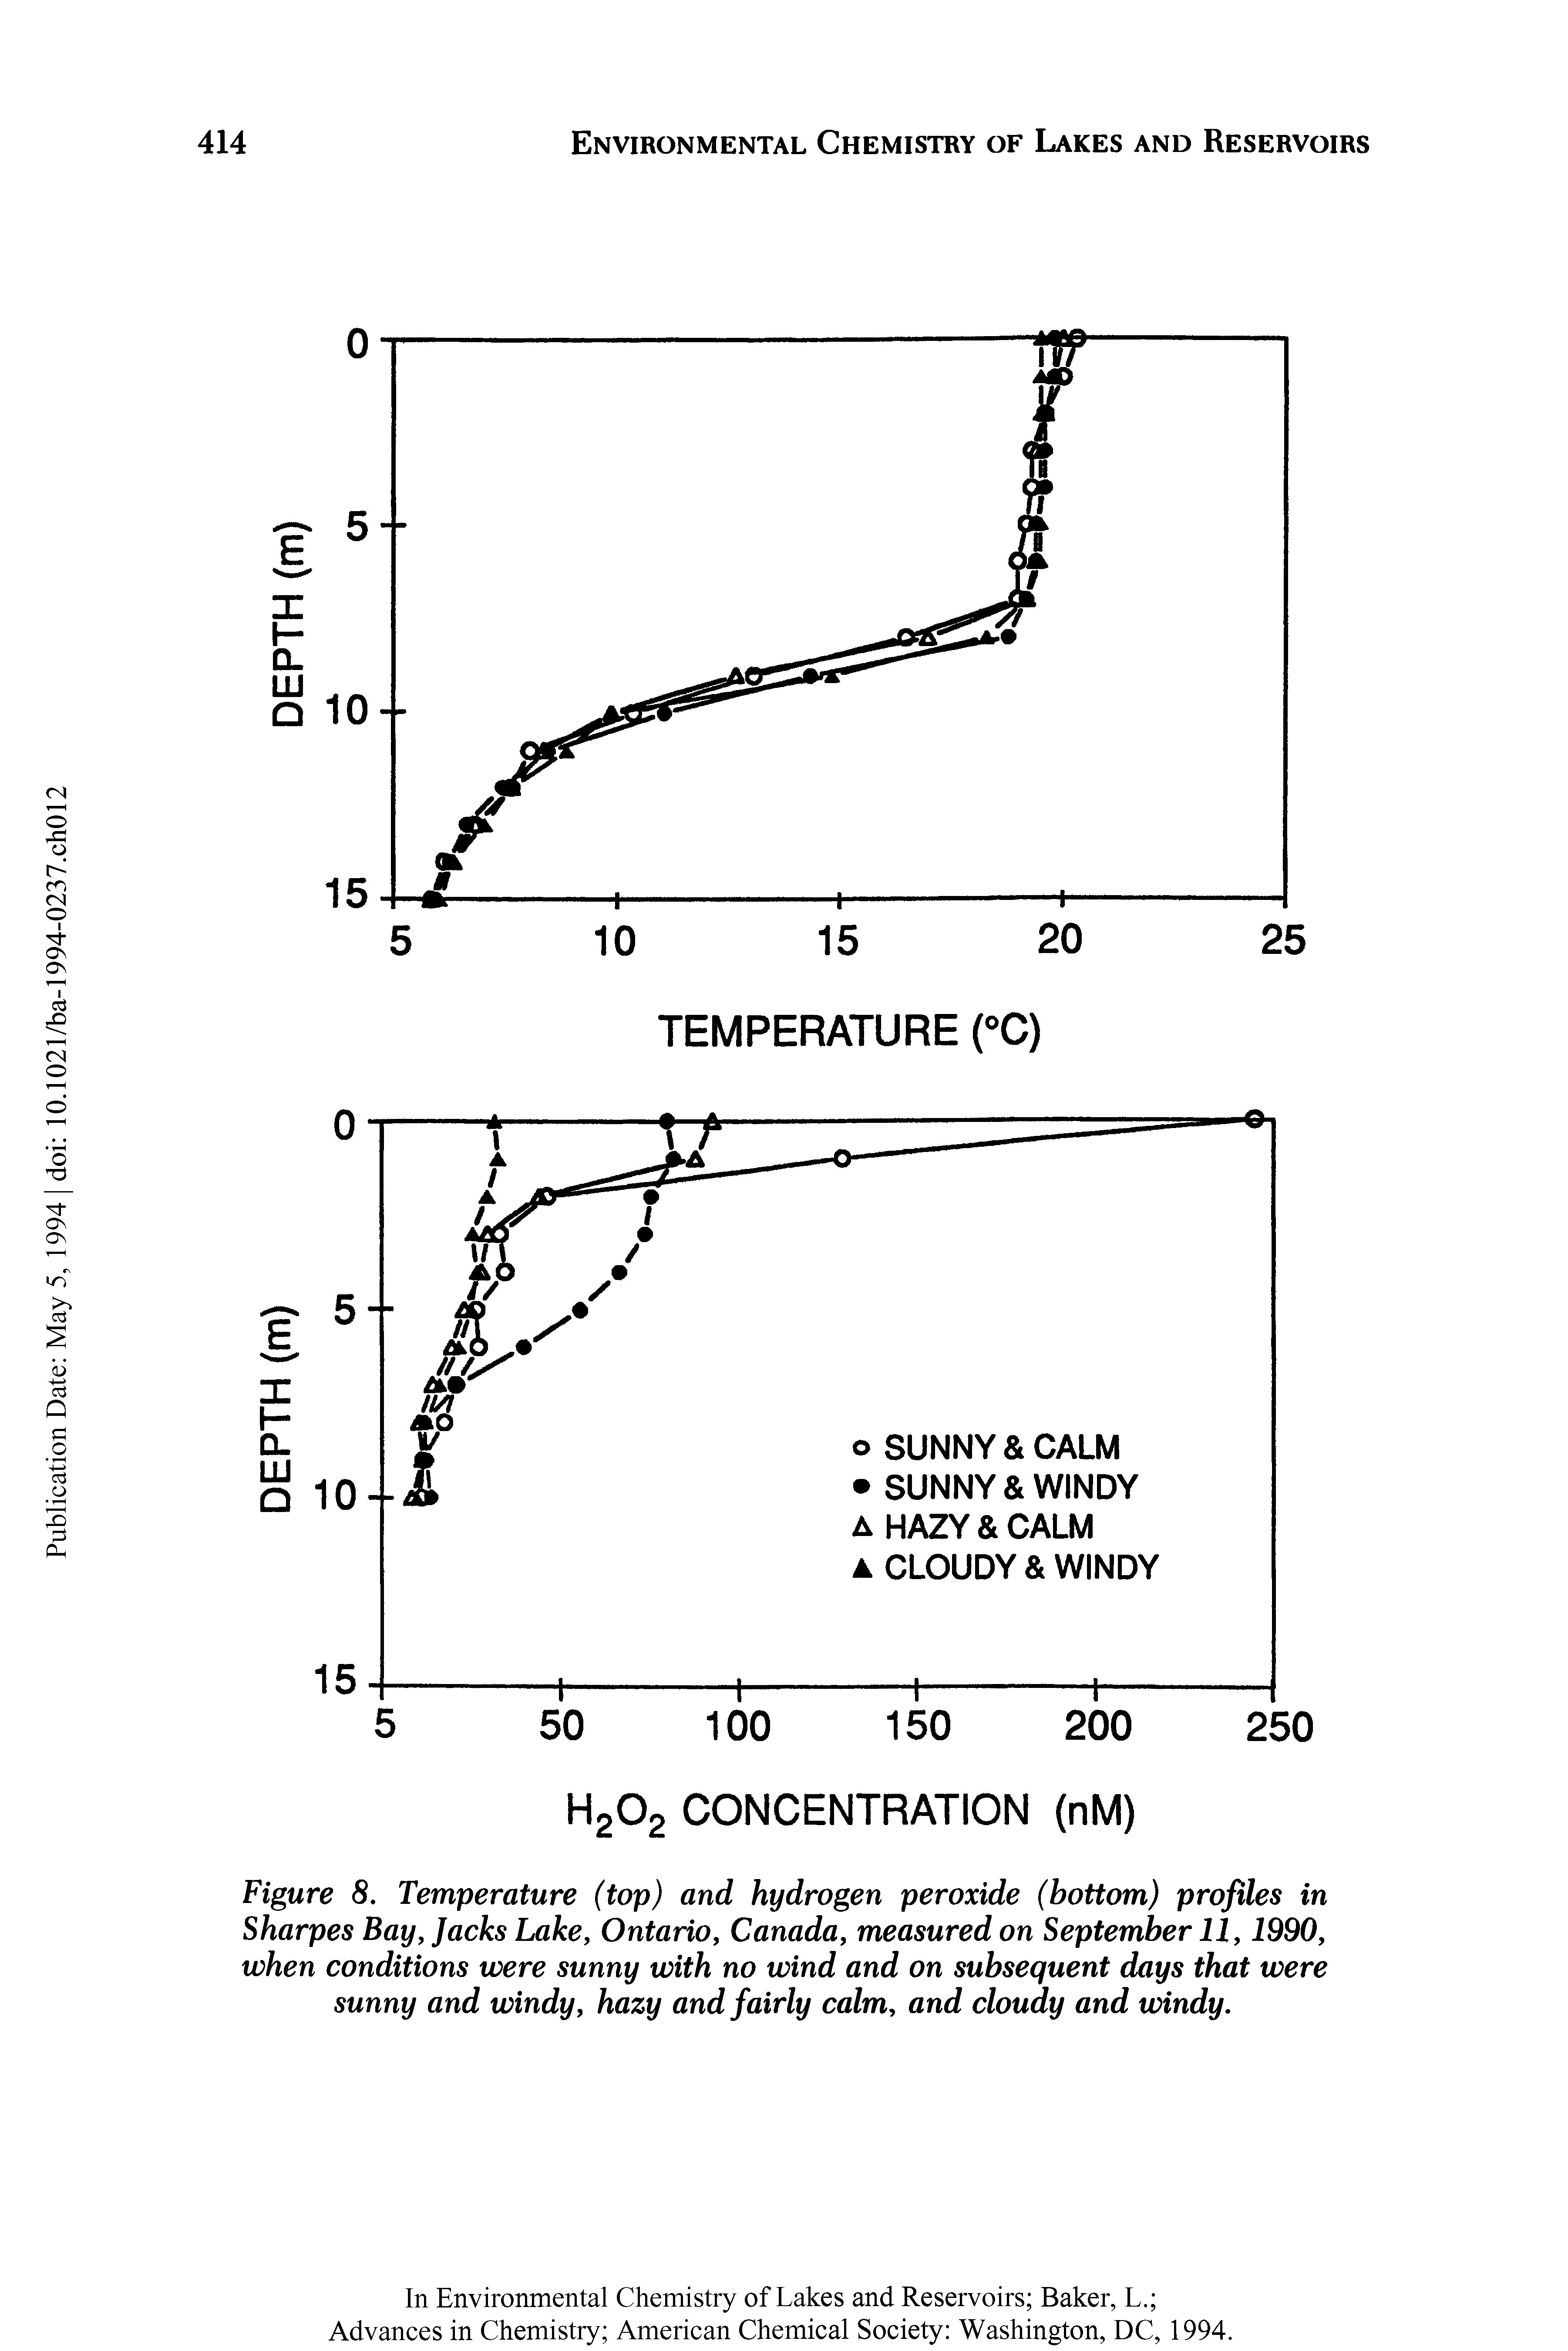 Figure 8. Temperature (top) and hydrogen peroxide (bottom) profiles in Sharpes Bay, Jacks Lake, Ontario, Canada, measured on September II, 1990, when conditions were sunny with no wind and on subsequent days that were sunny and windy, hazy and fairly calm, and cloudy and windy.